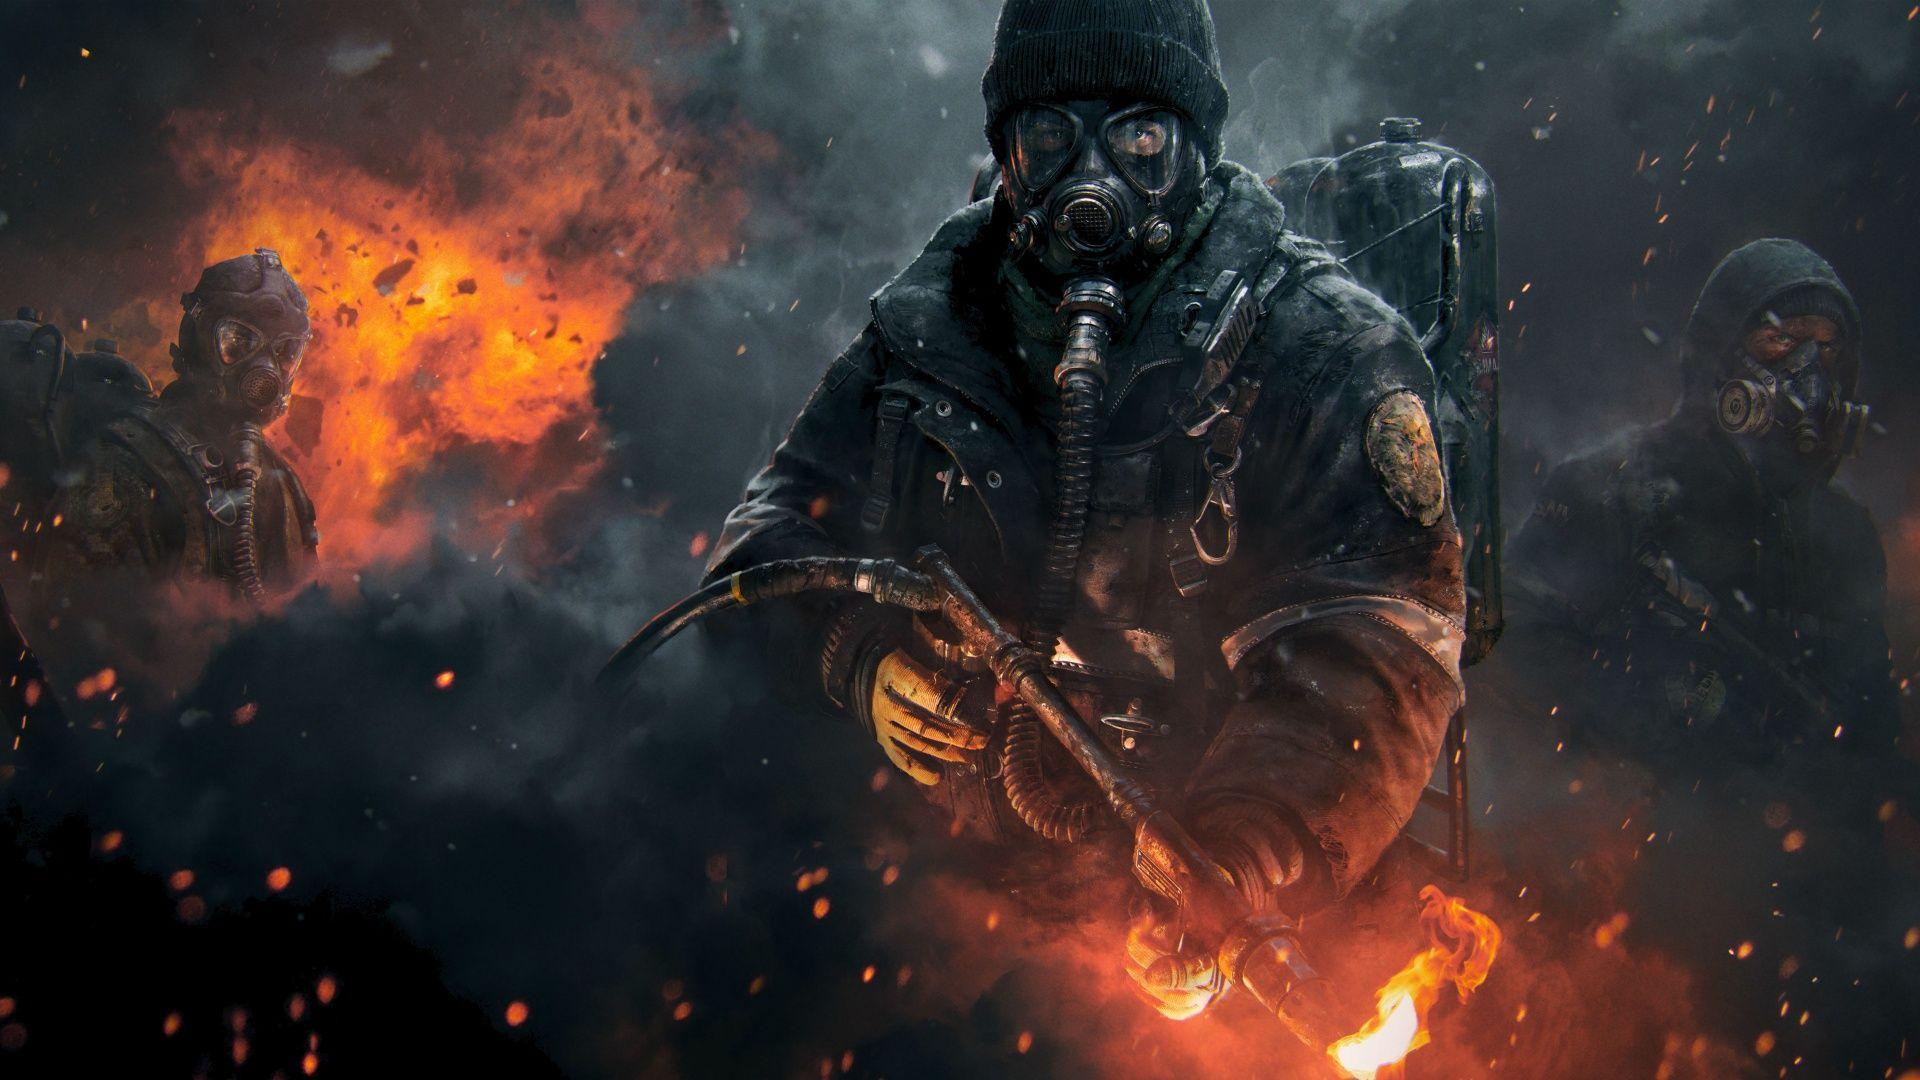 The Division Wallpaper Pack 434: The Division Wallpaper, 36